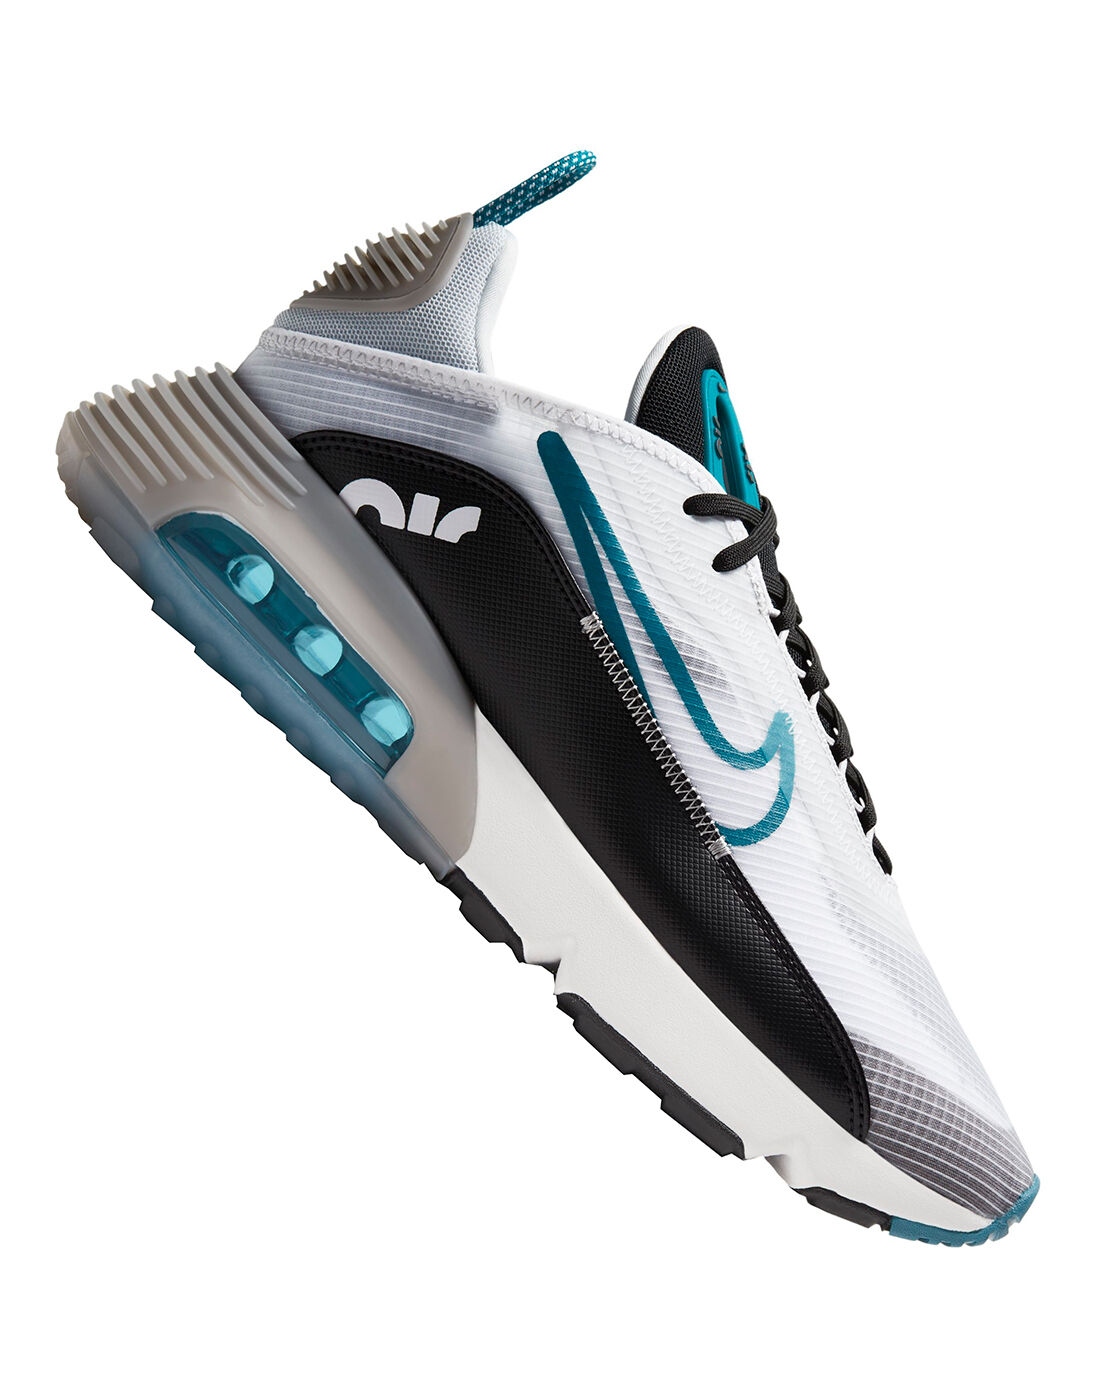 all air max numbers